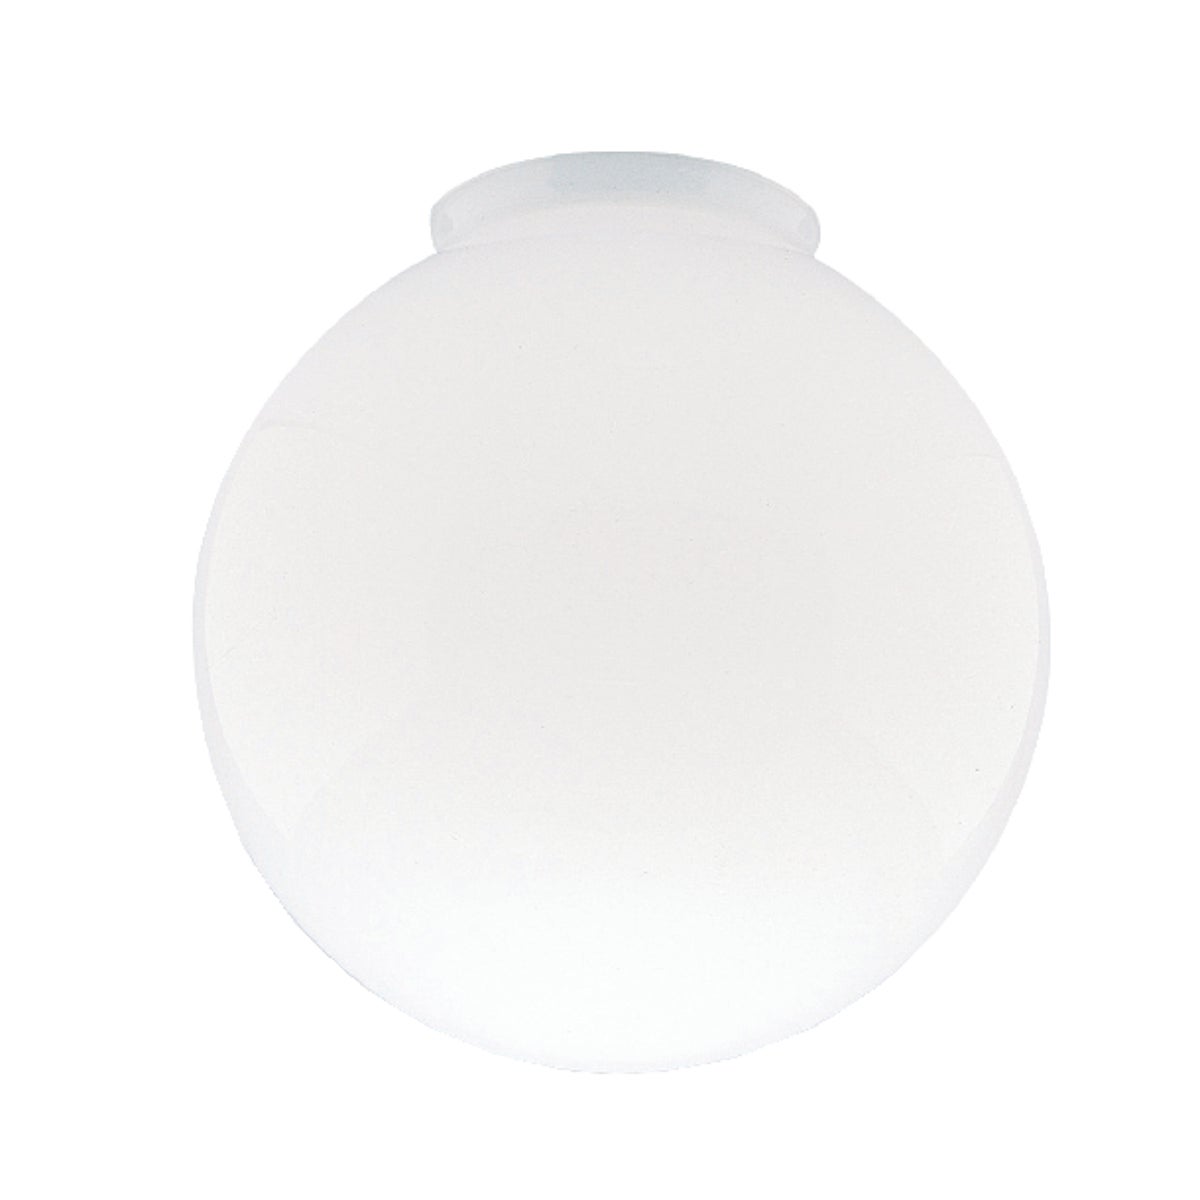 Item 525202, Gloss white classic replacement ceiling glass globe shade ideal for a 